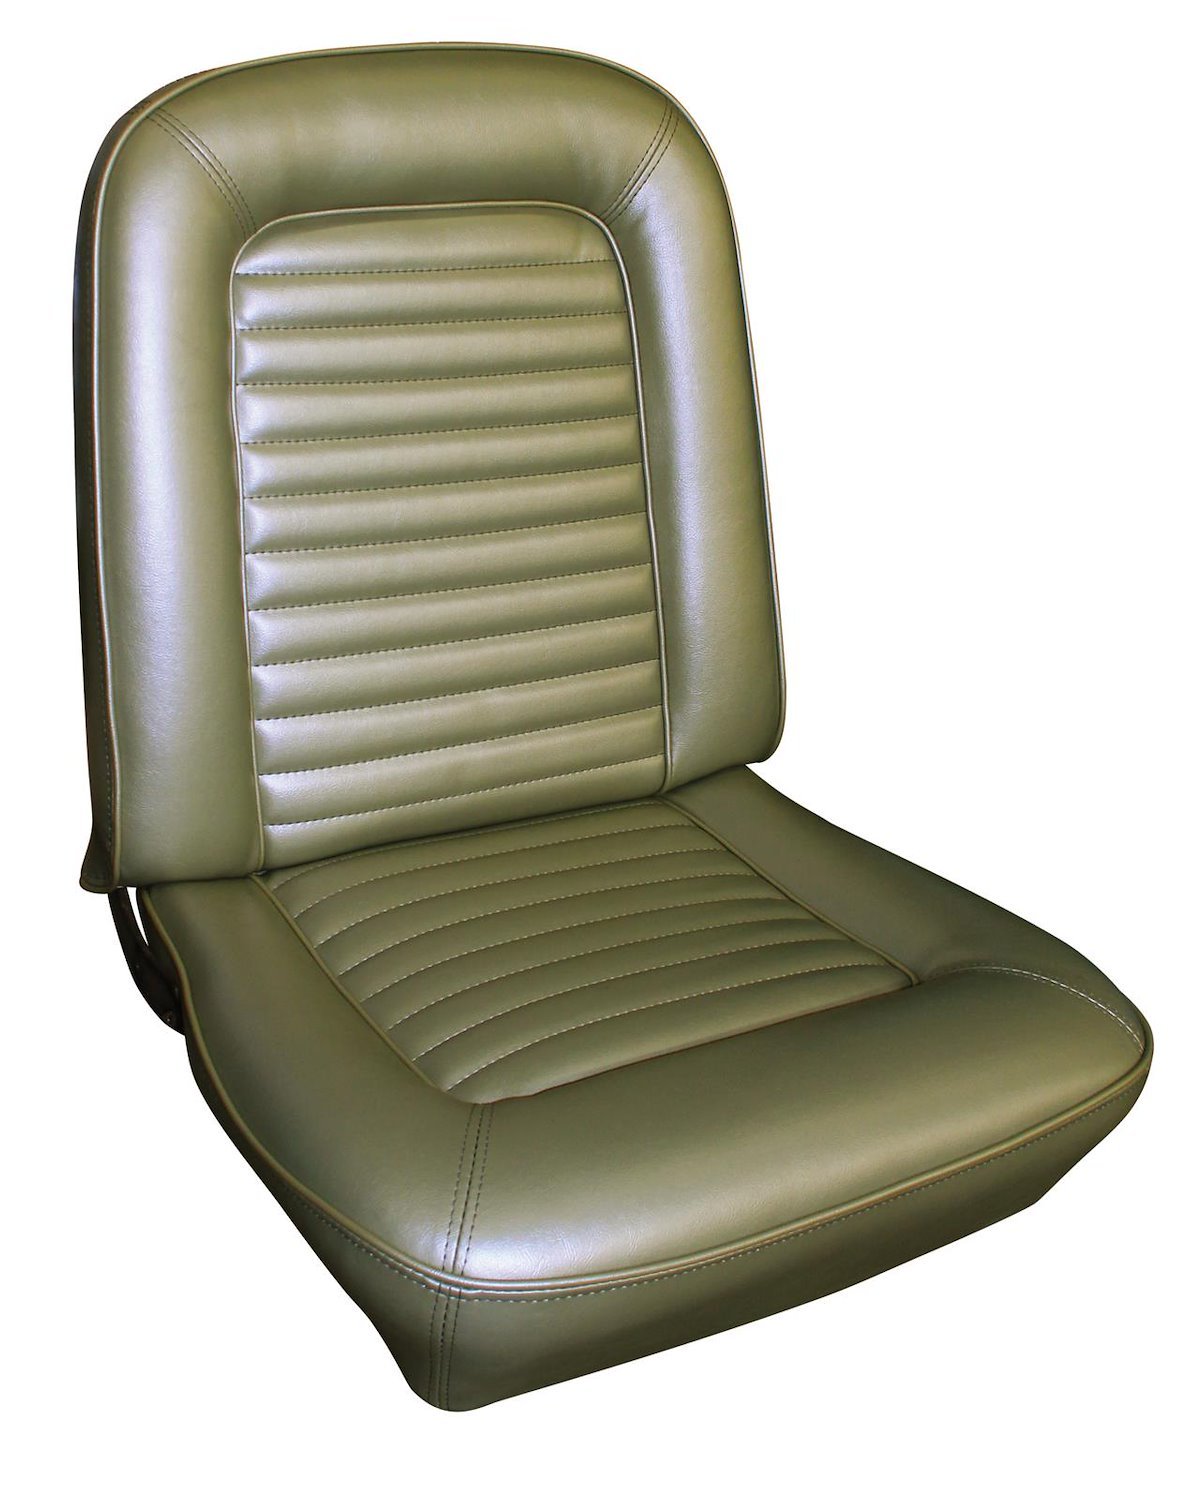 1967 Ford Mustang Deluxe Interior Front Bench Seat